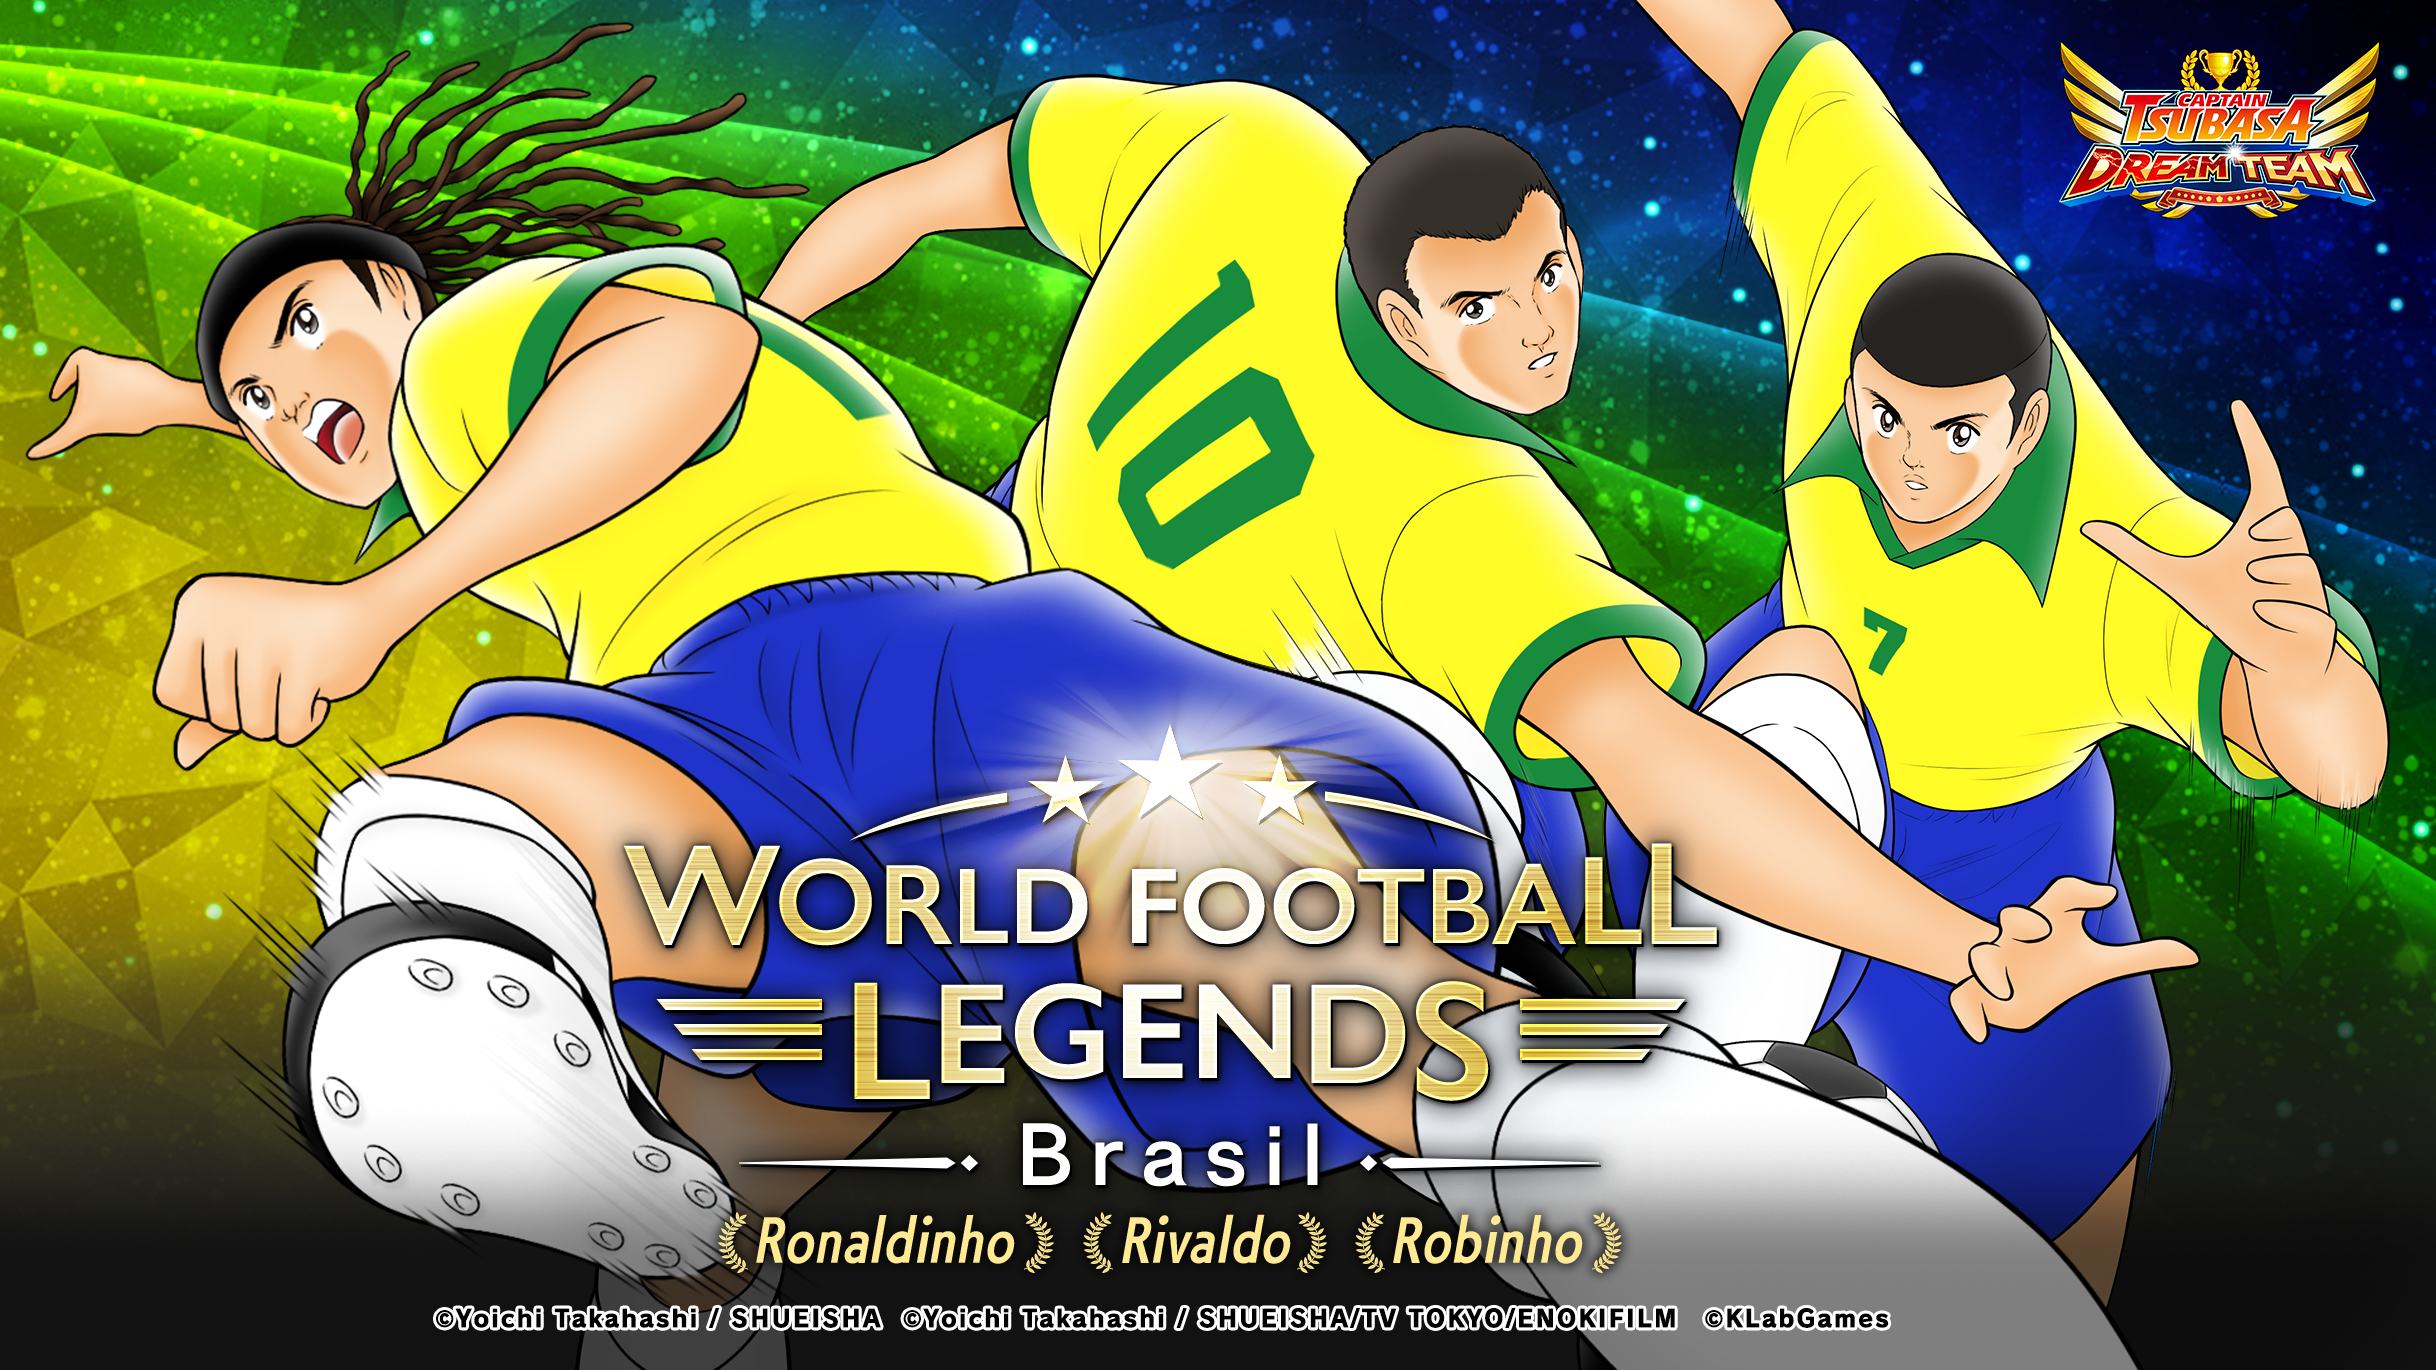 Legendary Players of Brasil come to 